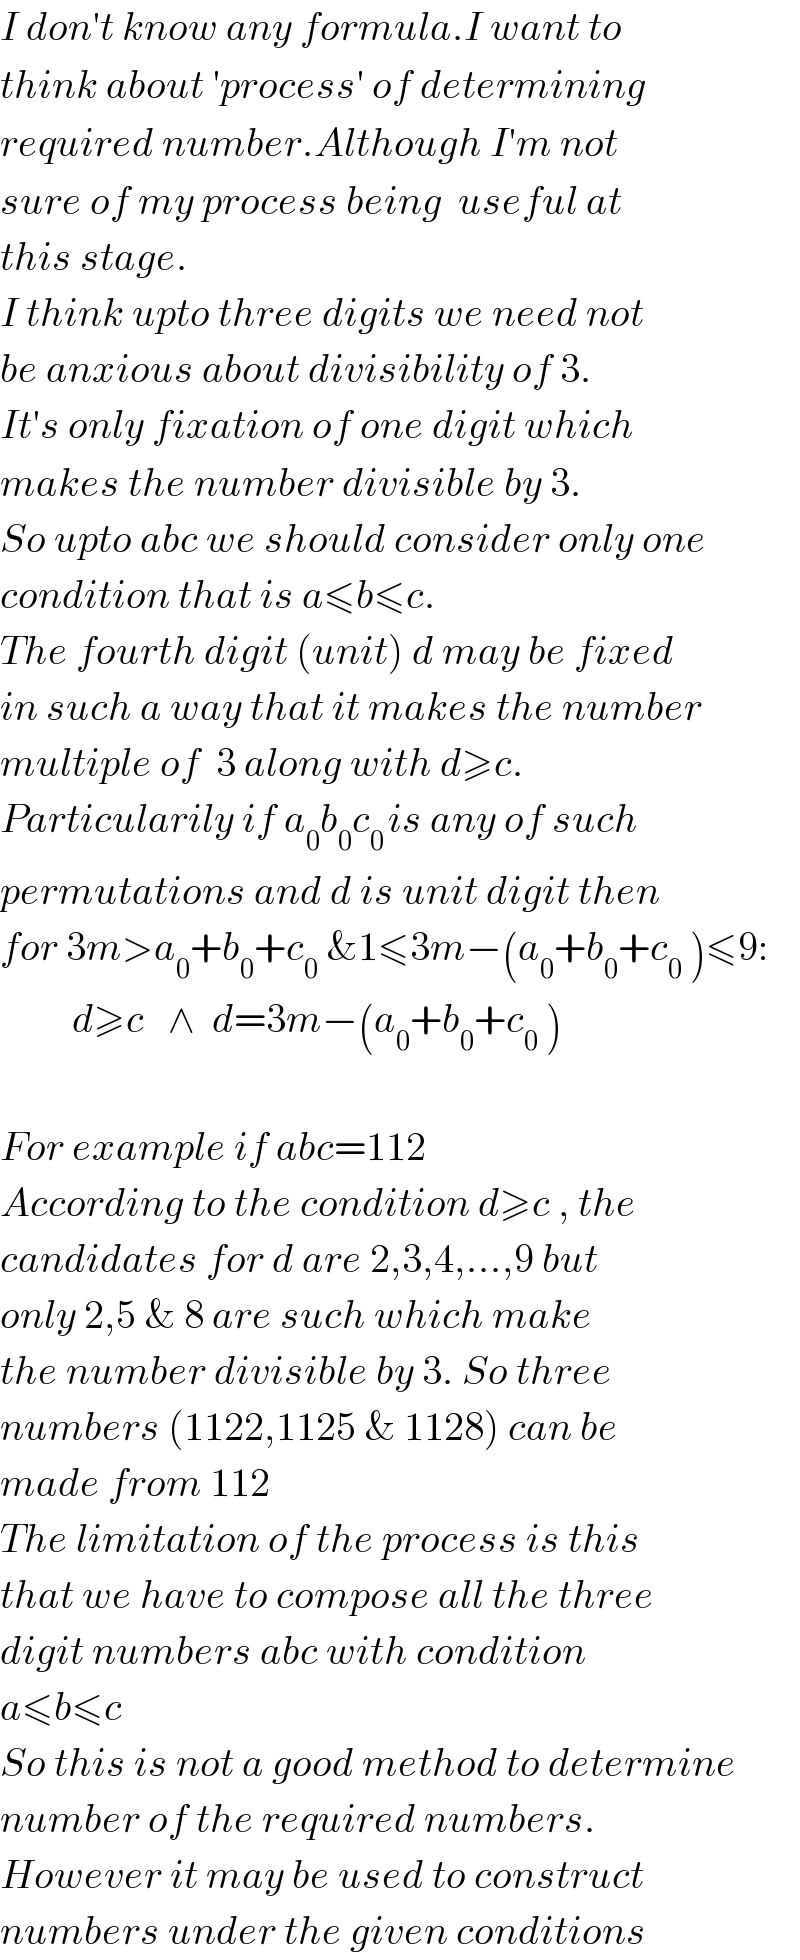 I don′t know any formula.I want to  think about ′process′ of determining  required number.Although I′m not  sure of my process being  useful at  this stage.  I think upto three digits we need not  be anxious about divisibility of 3.  It′s only fixation of one digit which  makes the number divisible by 3.  So upto abc we should consider only one  condition that is a≤b≤c.  The fourth digit (unit) d may be fixed  in such a way that it makes the number  multiple of  3 along with d≥c.  Particularily if a_0 b_0 c_(0 ) is any of such  permutations and d is unit digit then  for 3m>a_0 +b_0 +c_0  &1≤3m−(a_0 +b_0 +c_0  )≤9:           d≥c   ∧  d=3m−(a_0 +b_0 +c_0  )    For example if abc=112  According to the condition d≥c , the  candidates for d are 2,3,4,...,9 but  only 2,5 & 8 are such which make  the number divisible by 3. So three  numbers (1122,1125 & 1128) can be   made from 112  The limitation of the process is this  that we have to compose all the three  digit numbers abc with condition  a≤b≤c   So this is not a good method to determine  number of the required numbers.  However it may be used to construct  numbers under the given conditions  